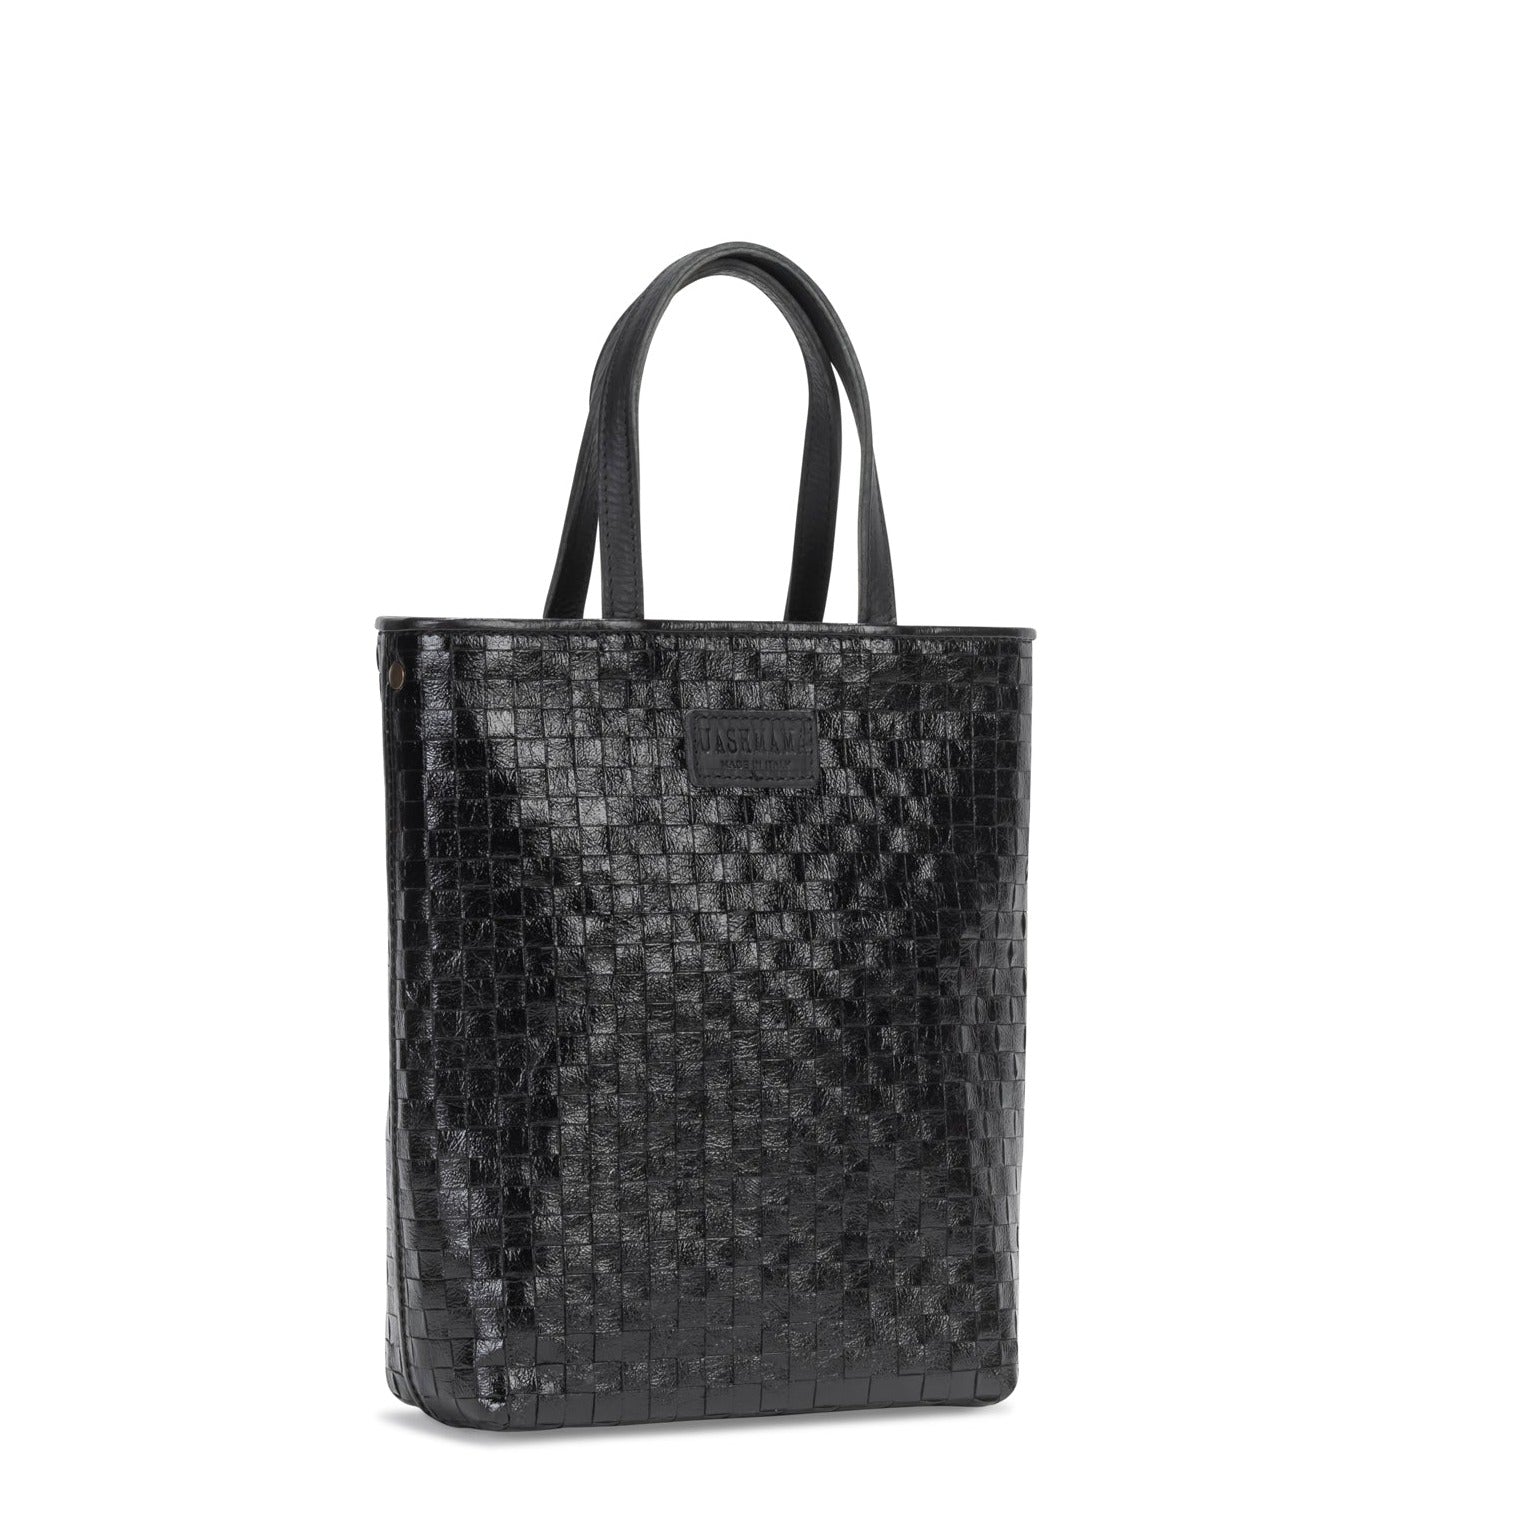 A woven washable tote bag is shown from a 3/4 angle. It has two top handles and is black in colour.